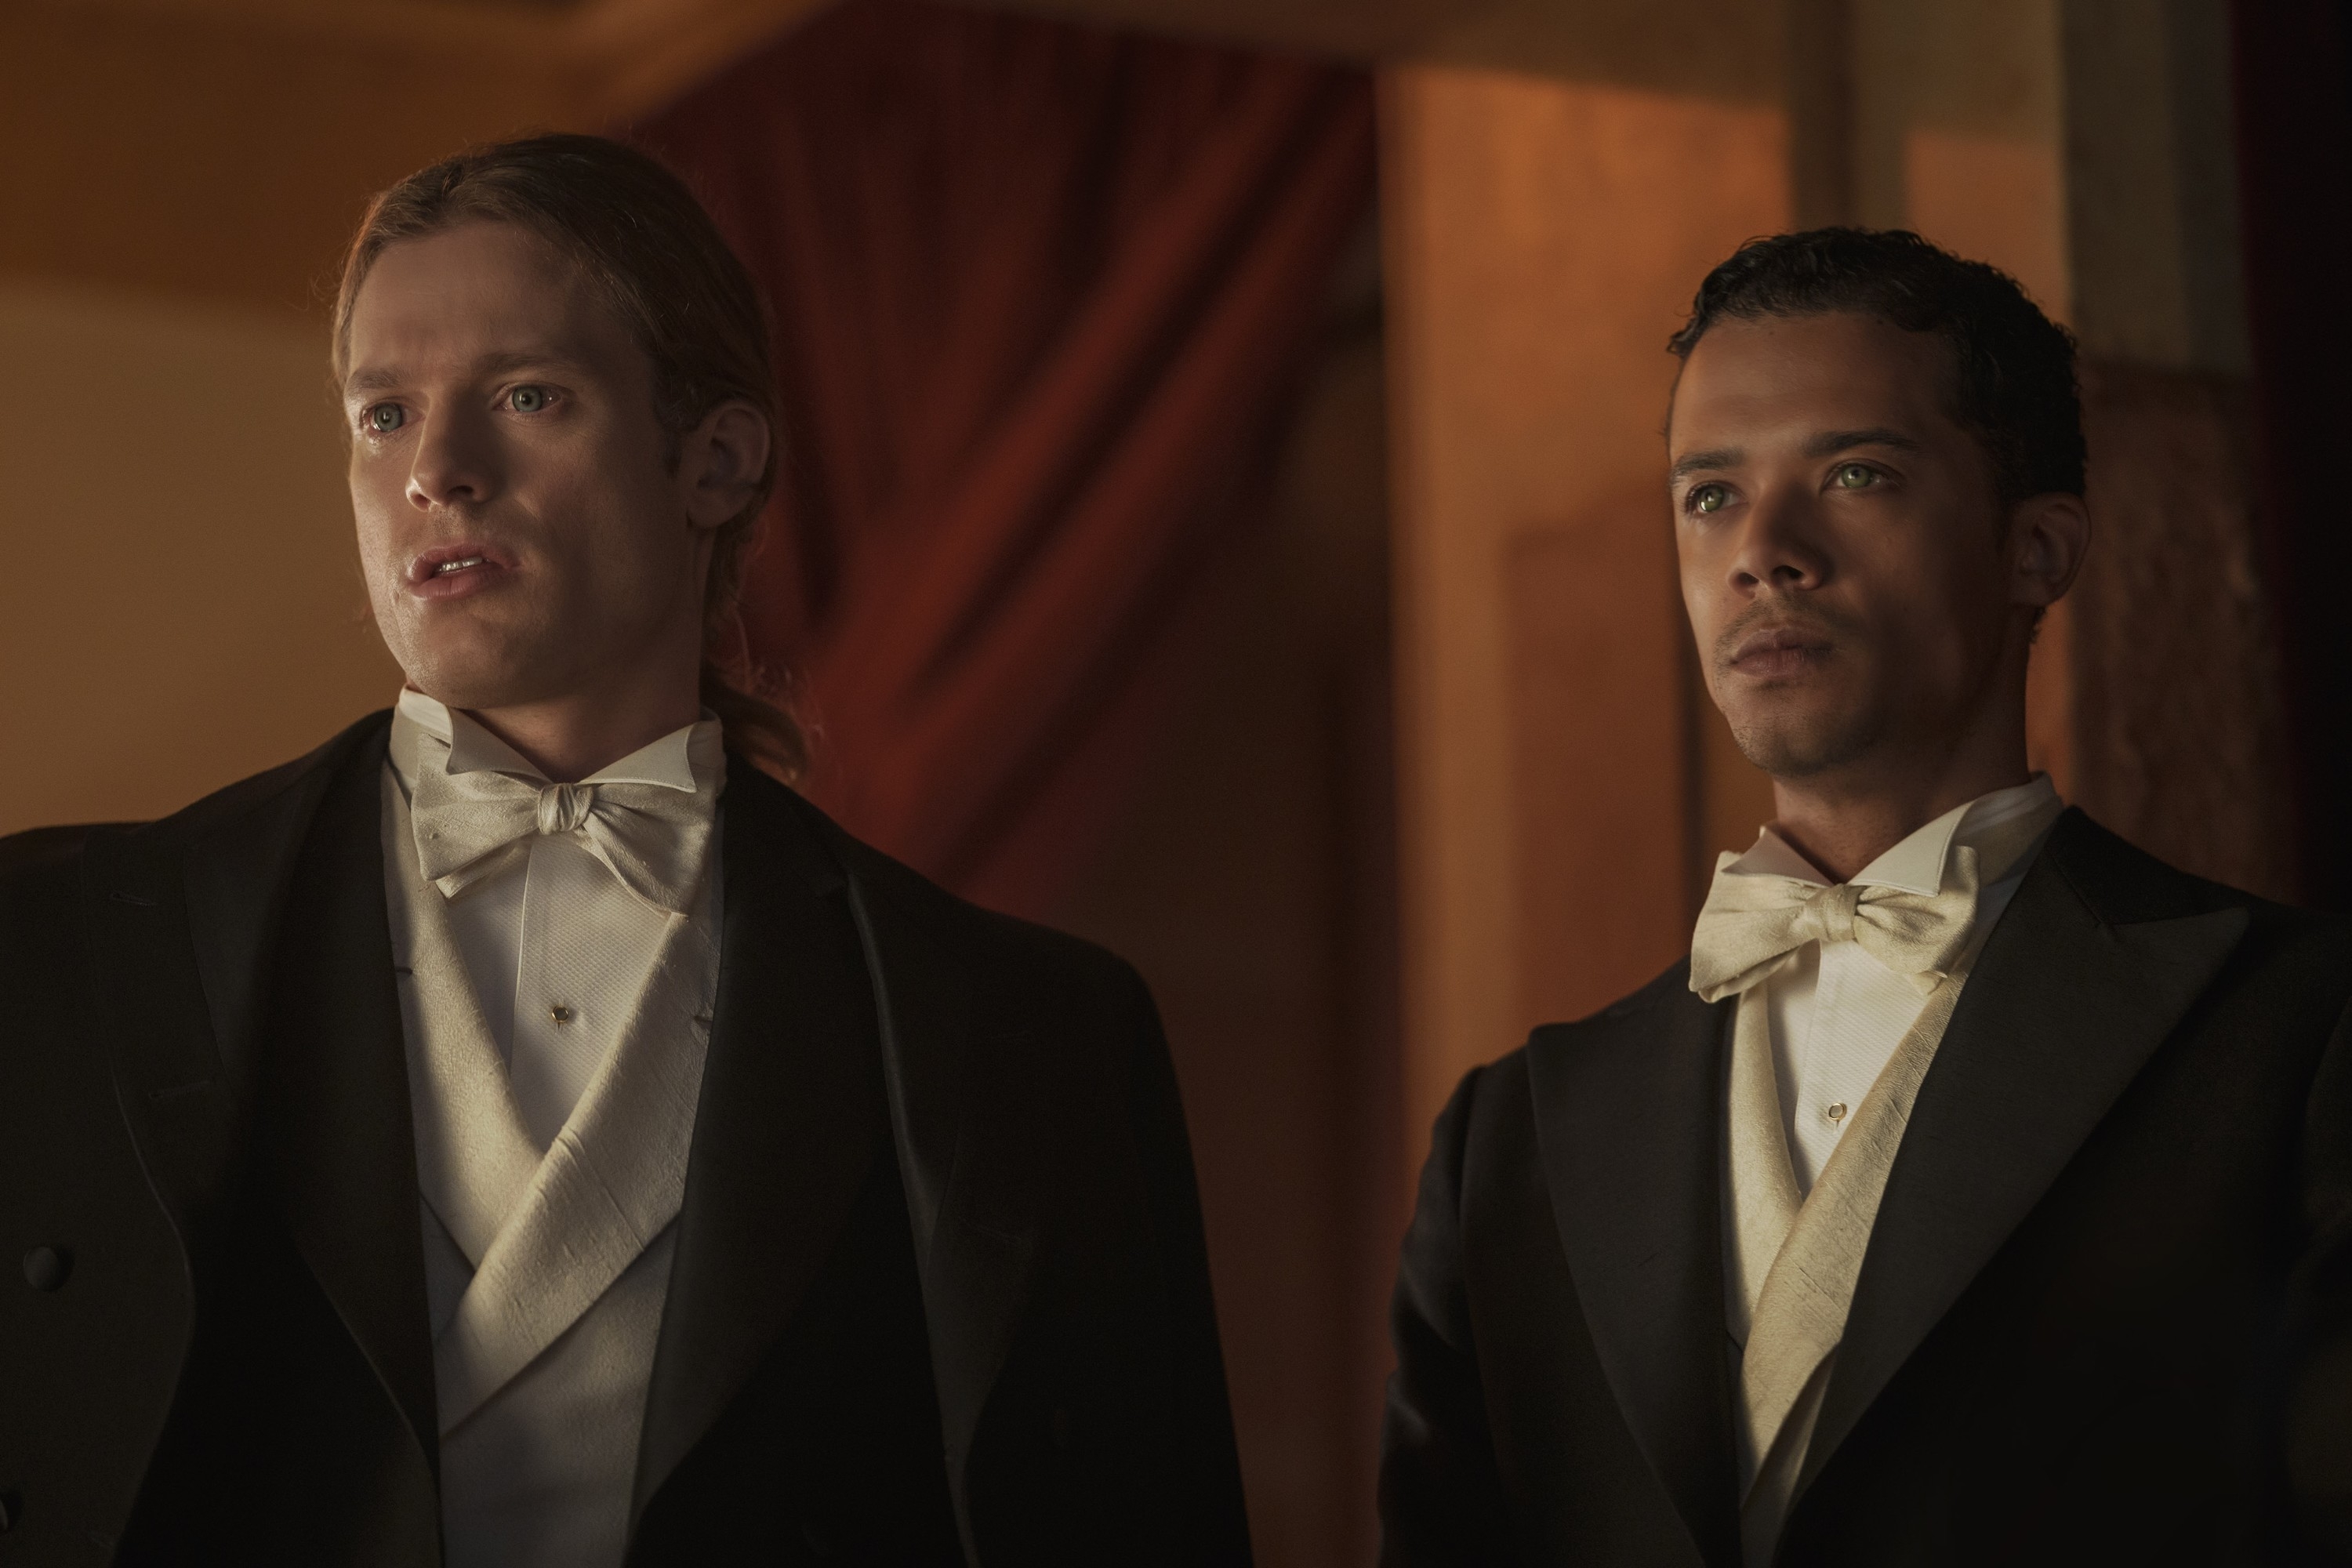 Two men in formal black tuxedos with bow ties, looking intently to the side, in a dimly lit setting